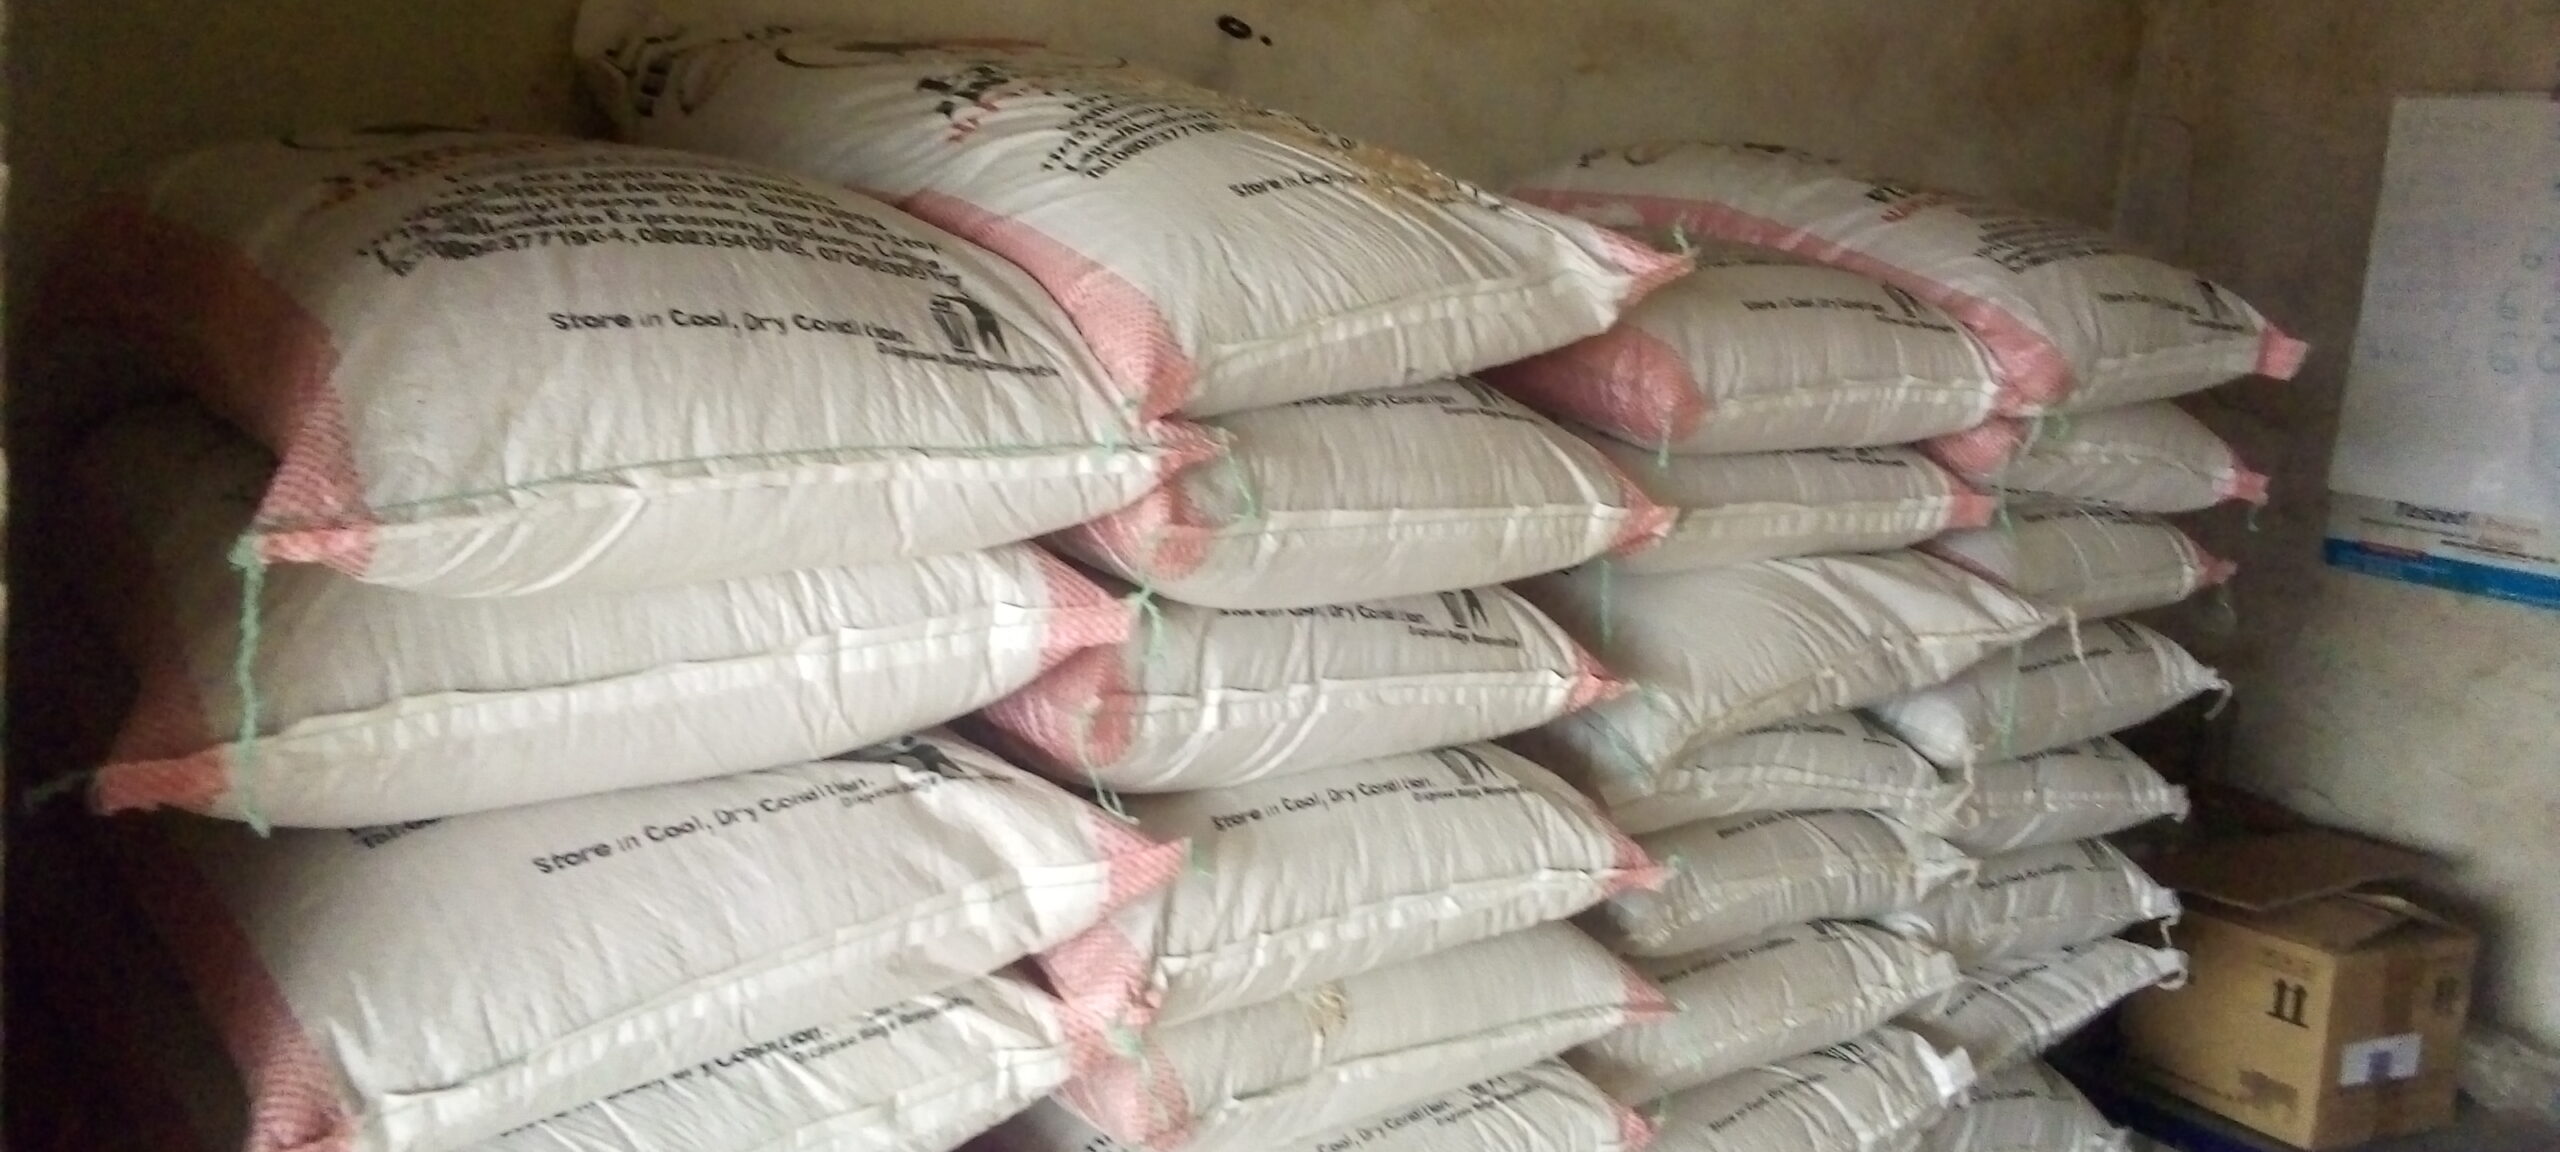 Price of 1 bag of Poultry feed in Nigeria